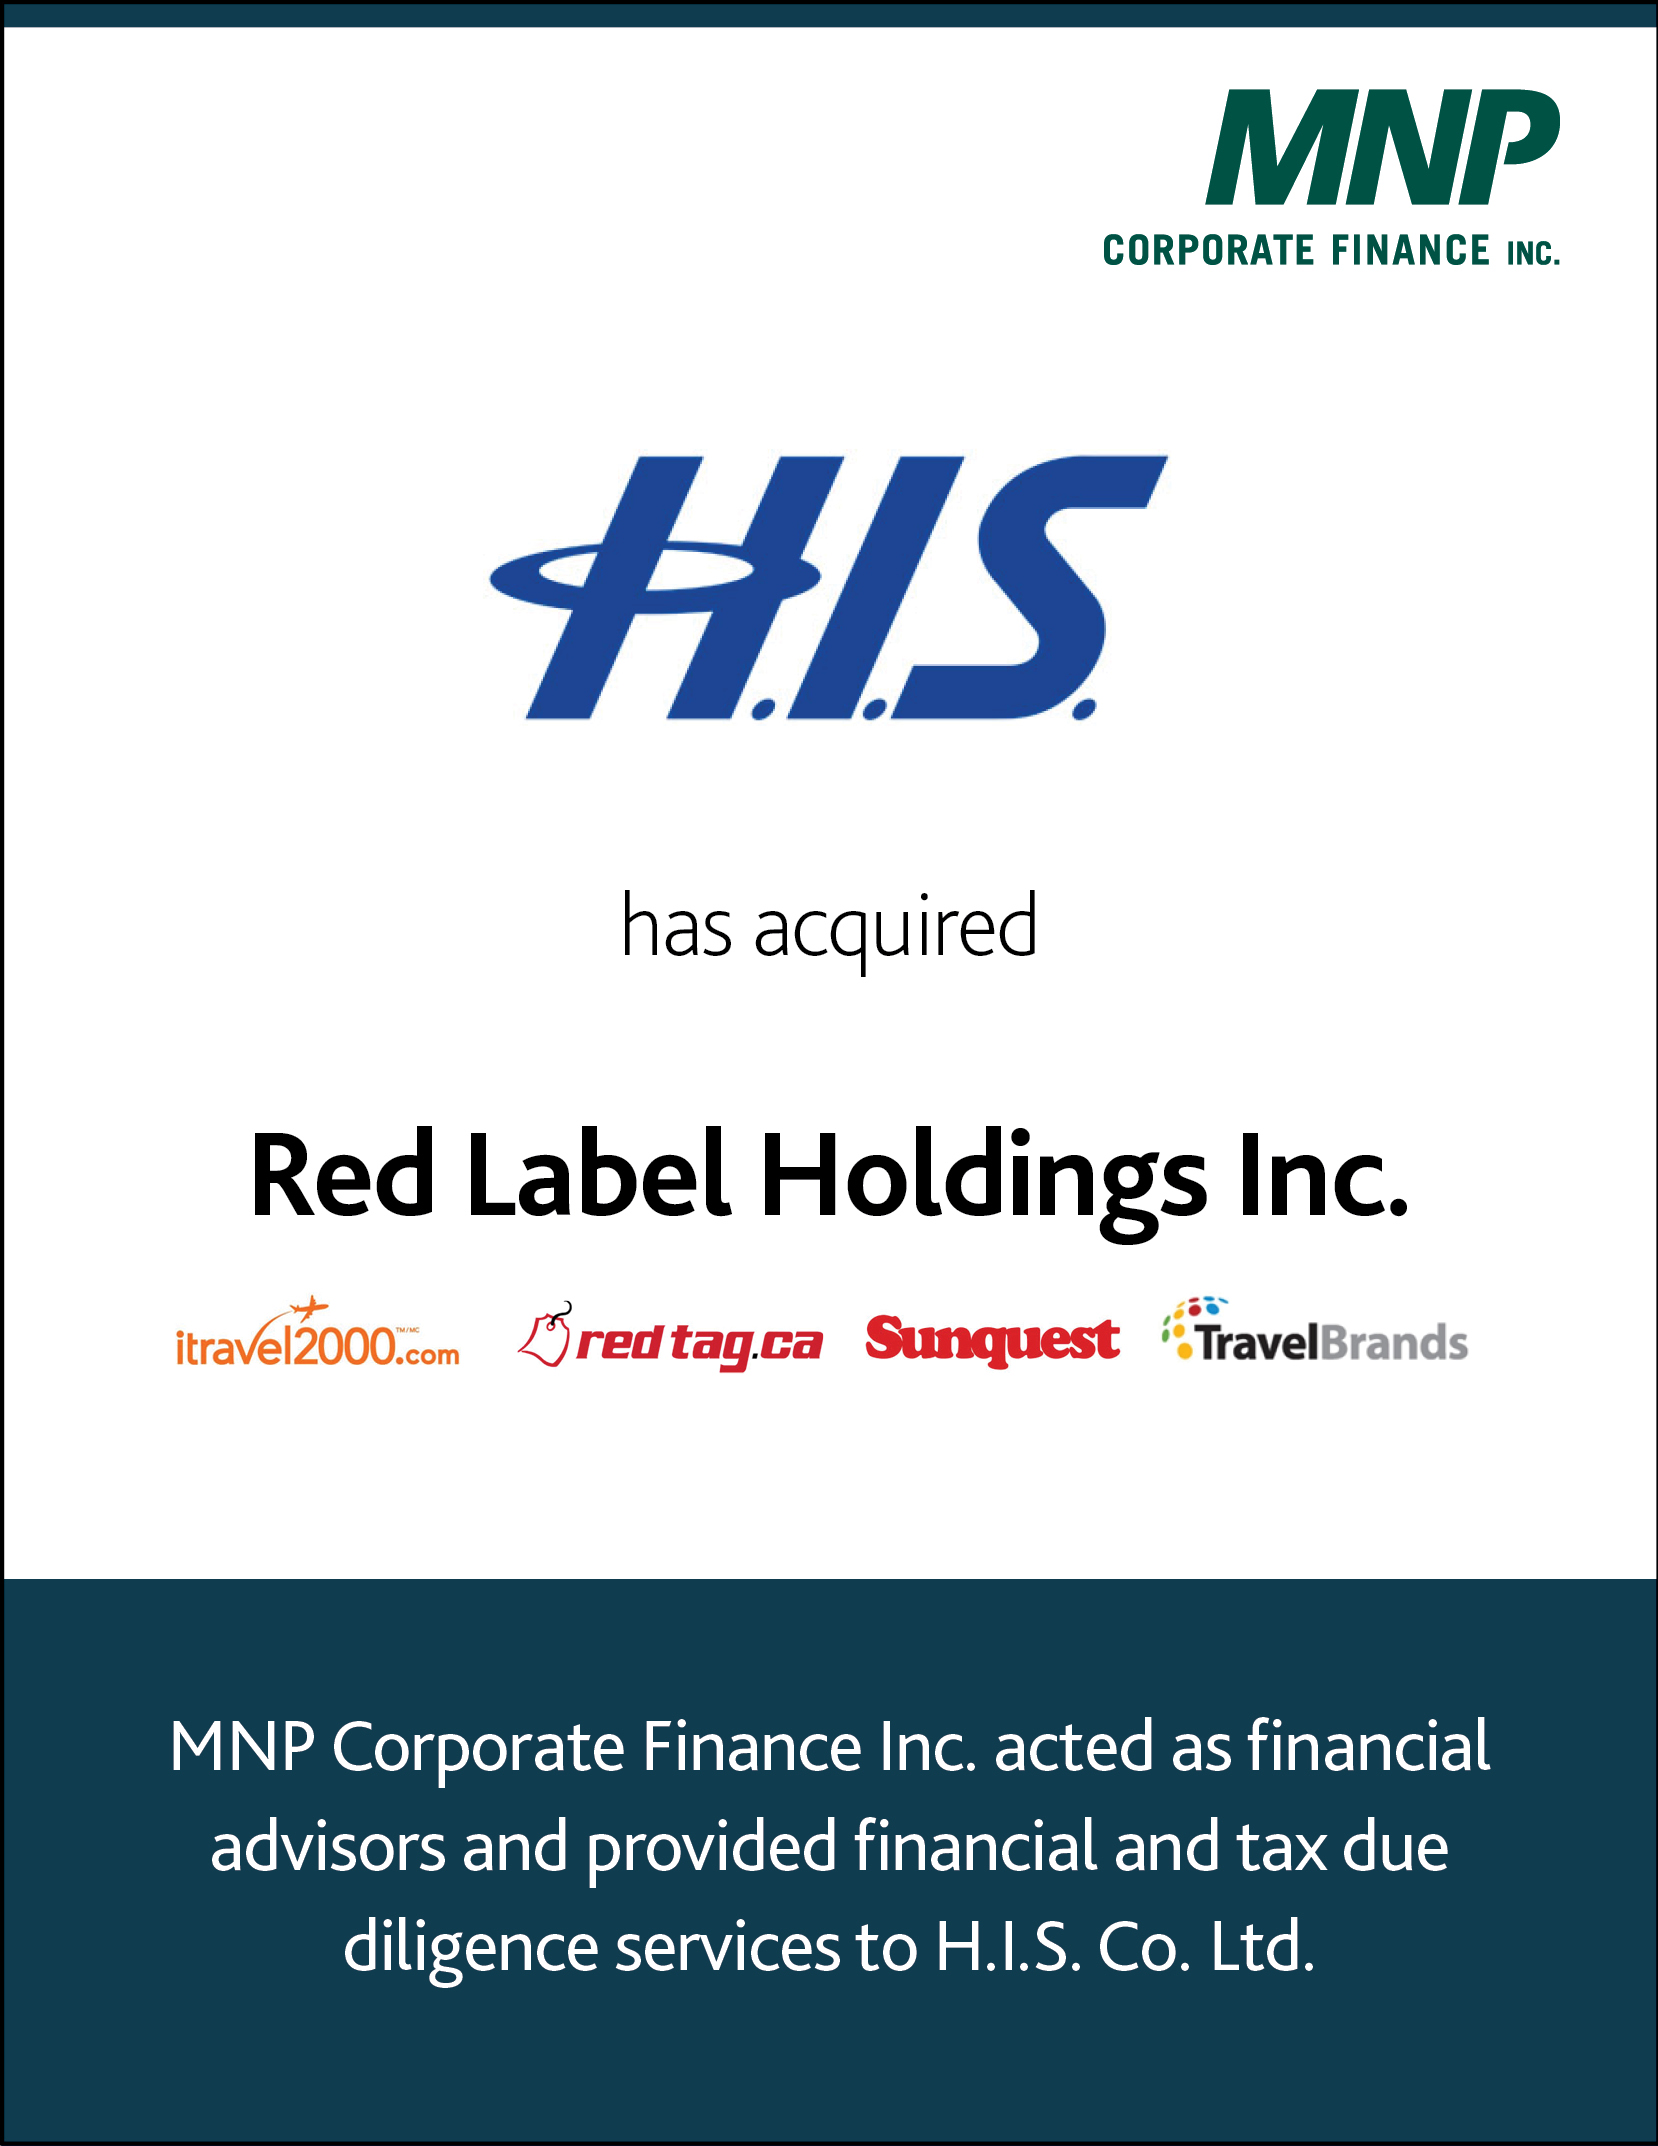 H.I.S. has acquired Red Label Holdings Inc